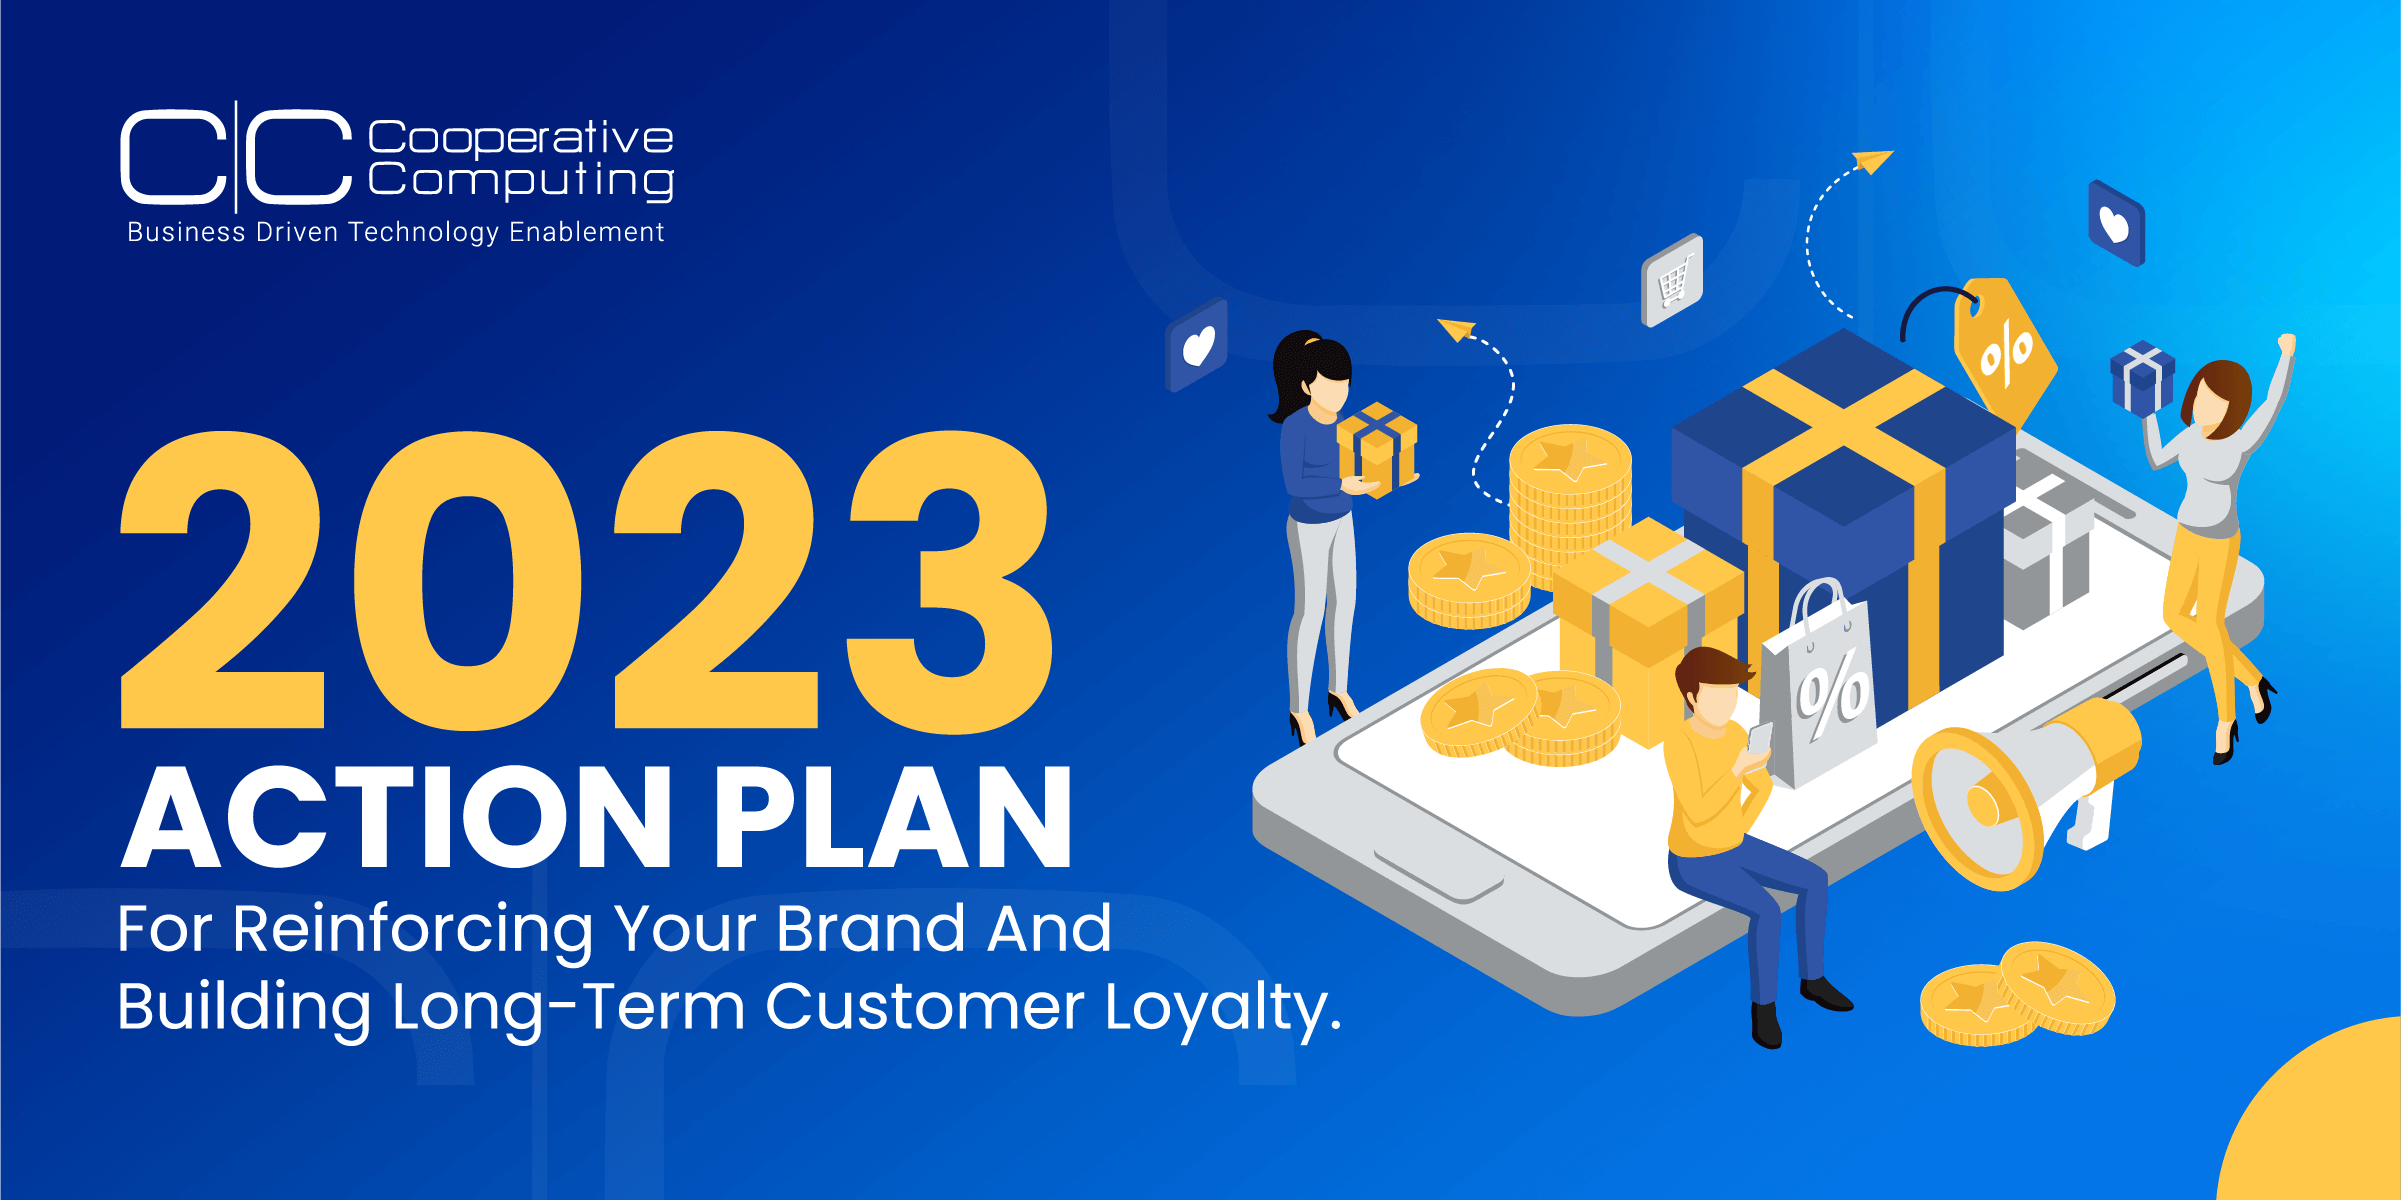 Action Plan 2023 for Reinforcing Your Brand and Building Long-Term Customer Loyalty